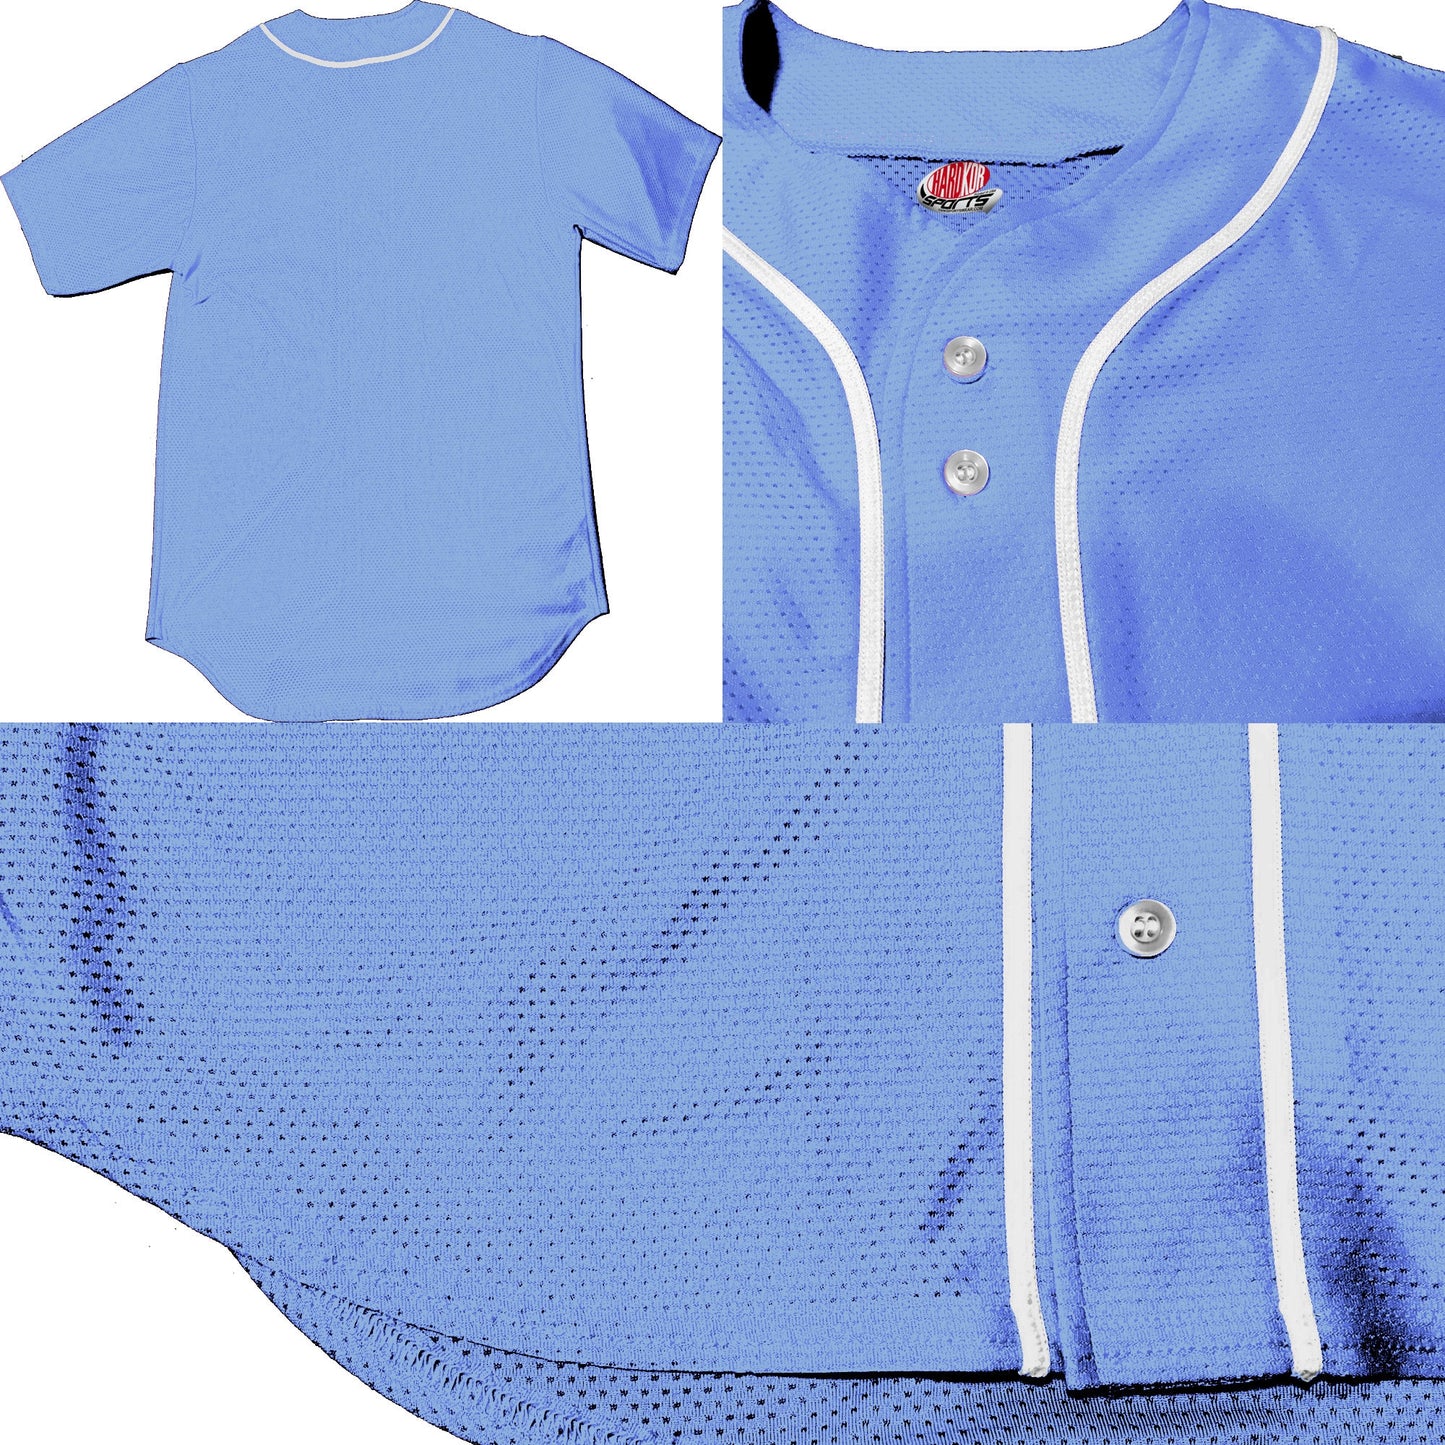 Personalized Light Blue Baseball Jersey with White Piping | Customized Baseball Jersey Logo | Full Button Down | Your Team, Player, Numbers